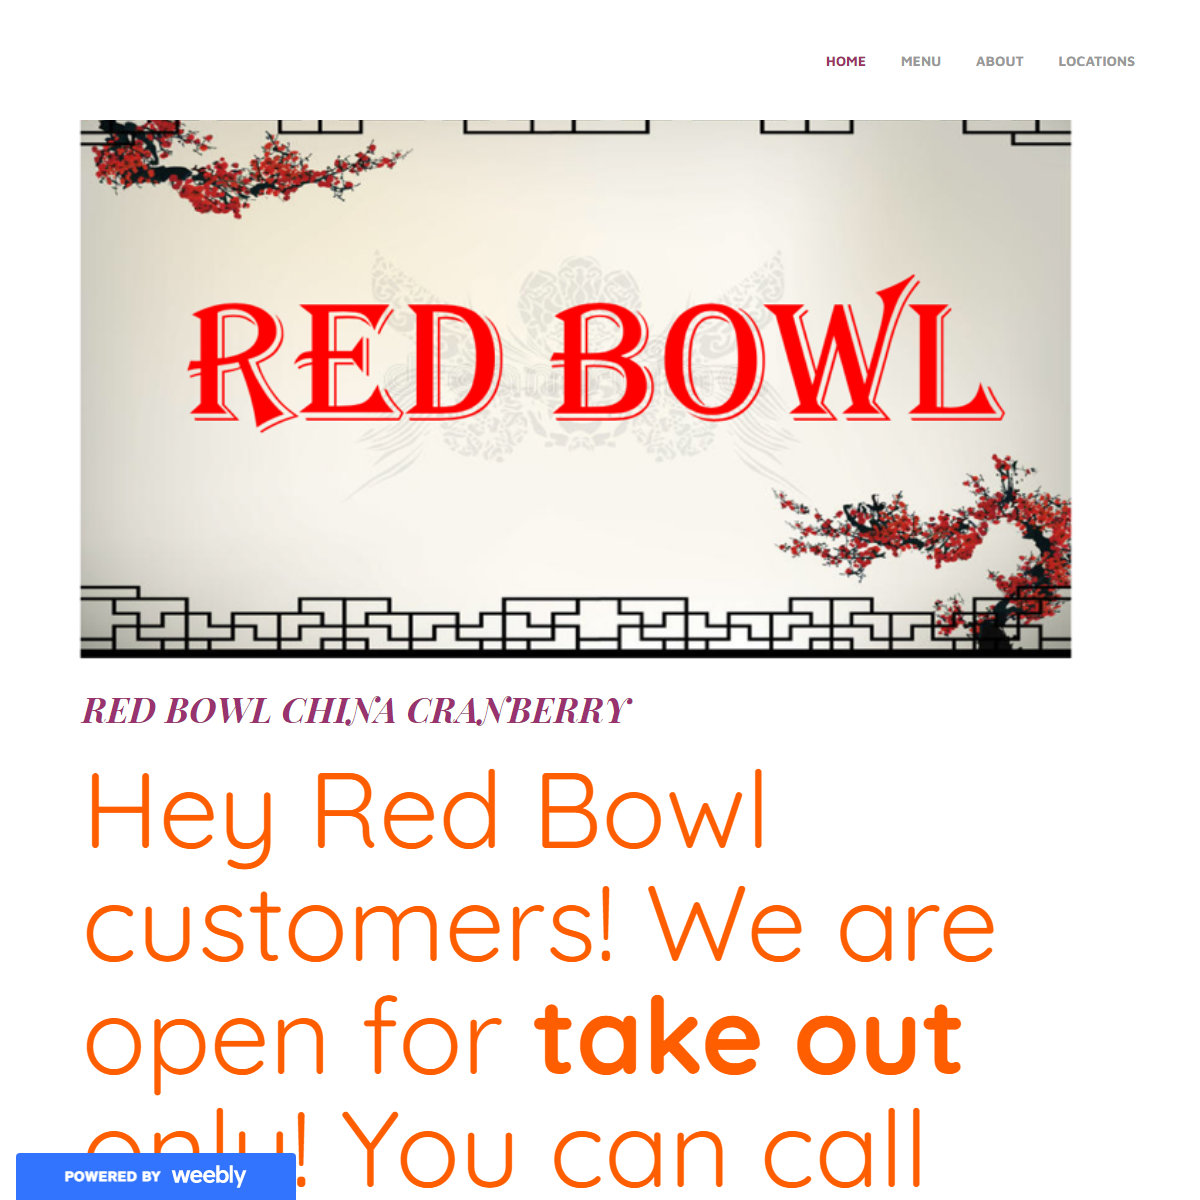 A complete backup of https://redbowlchinacranberry.weebly.com/